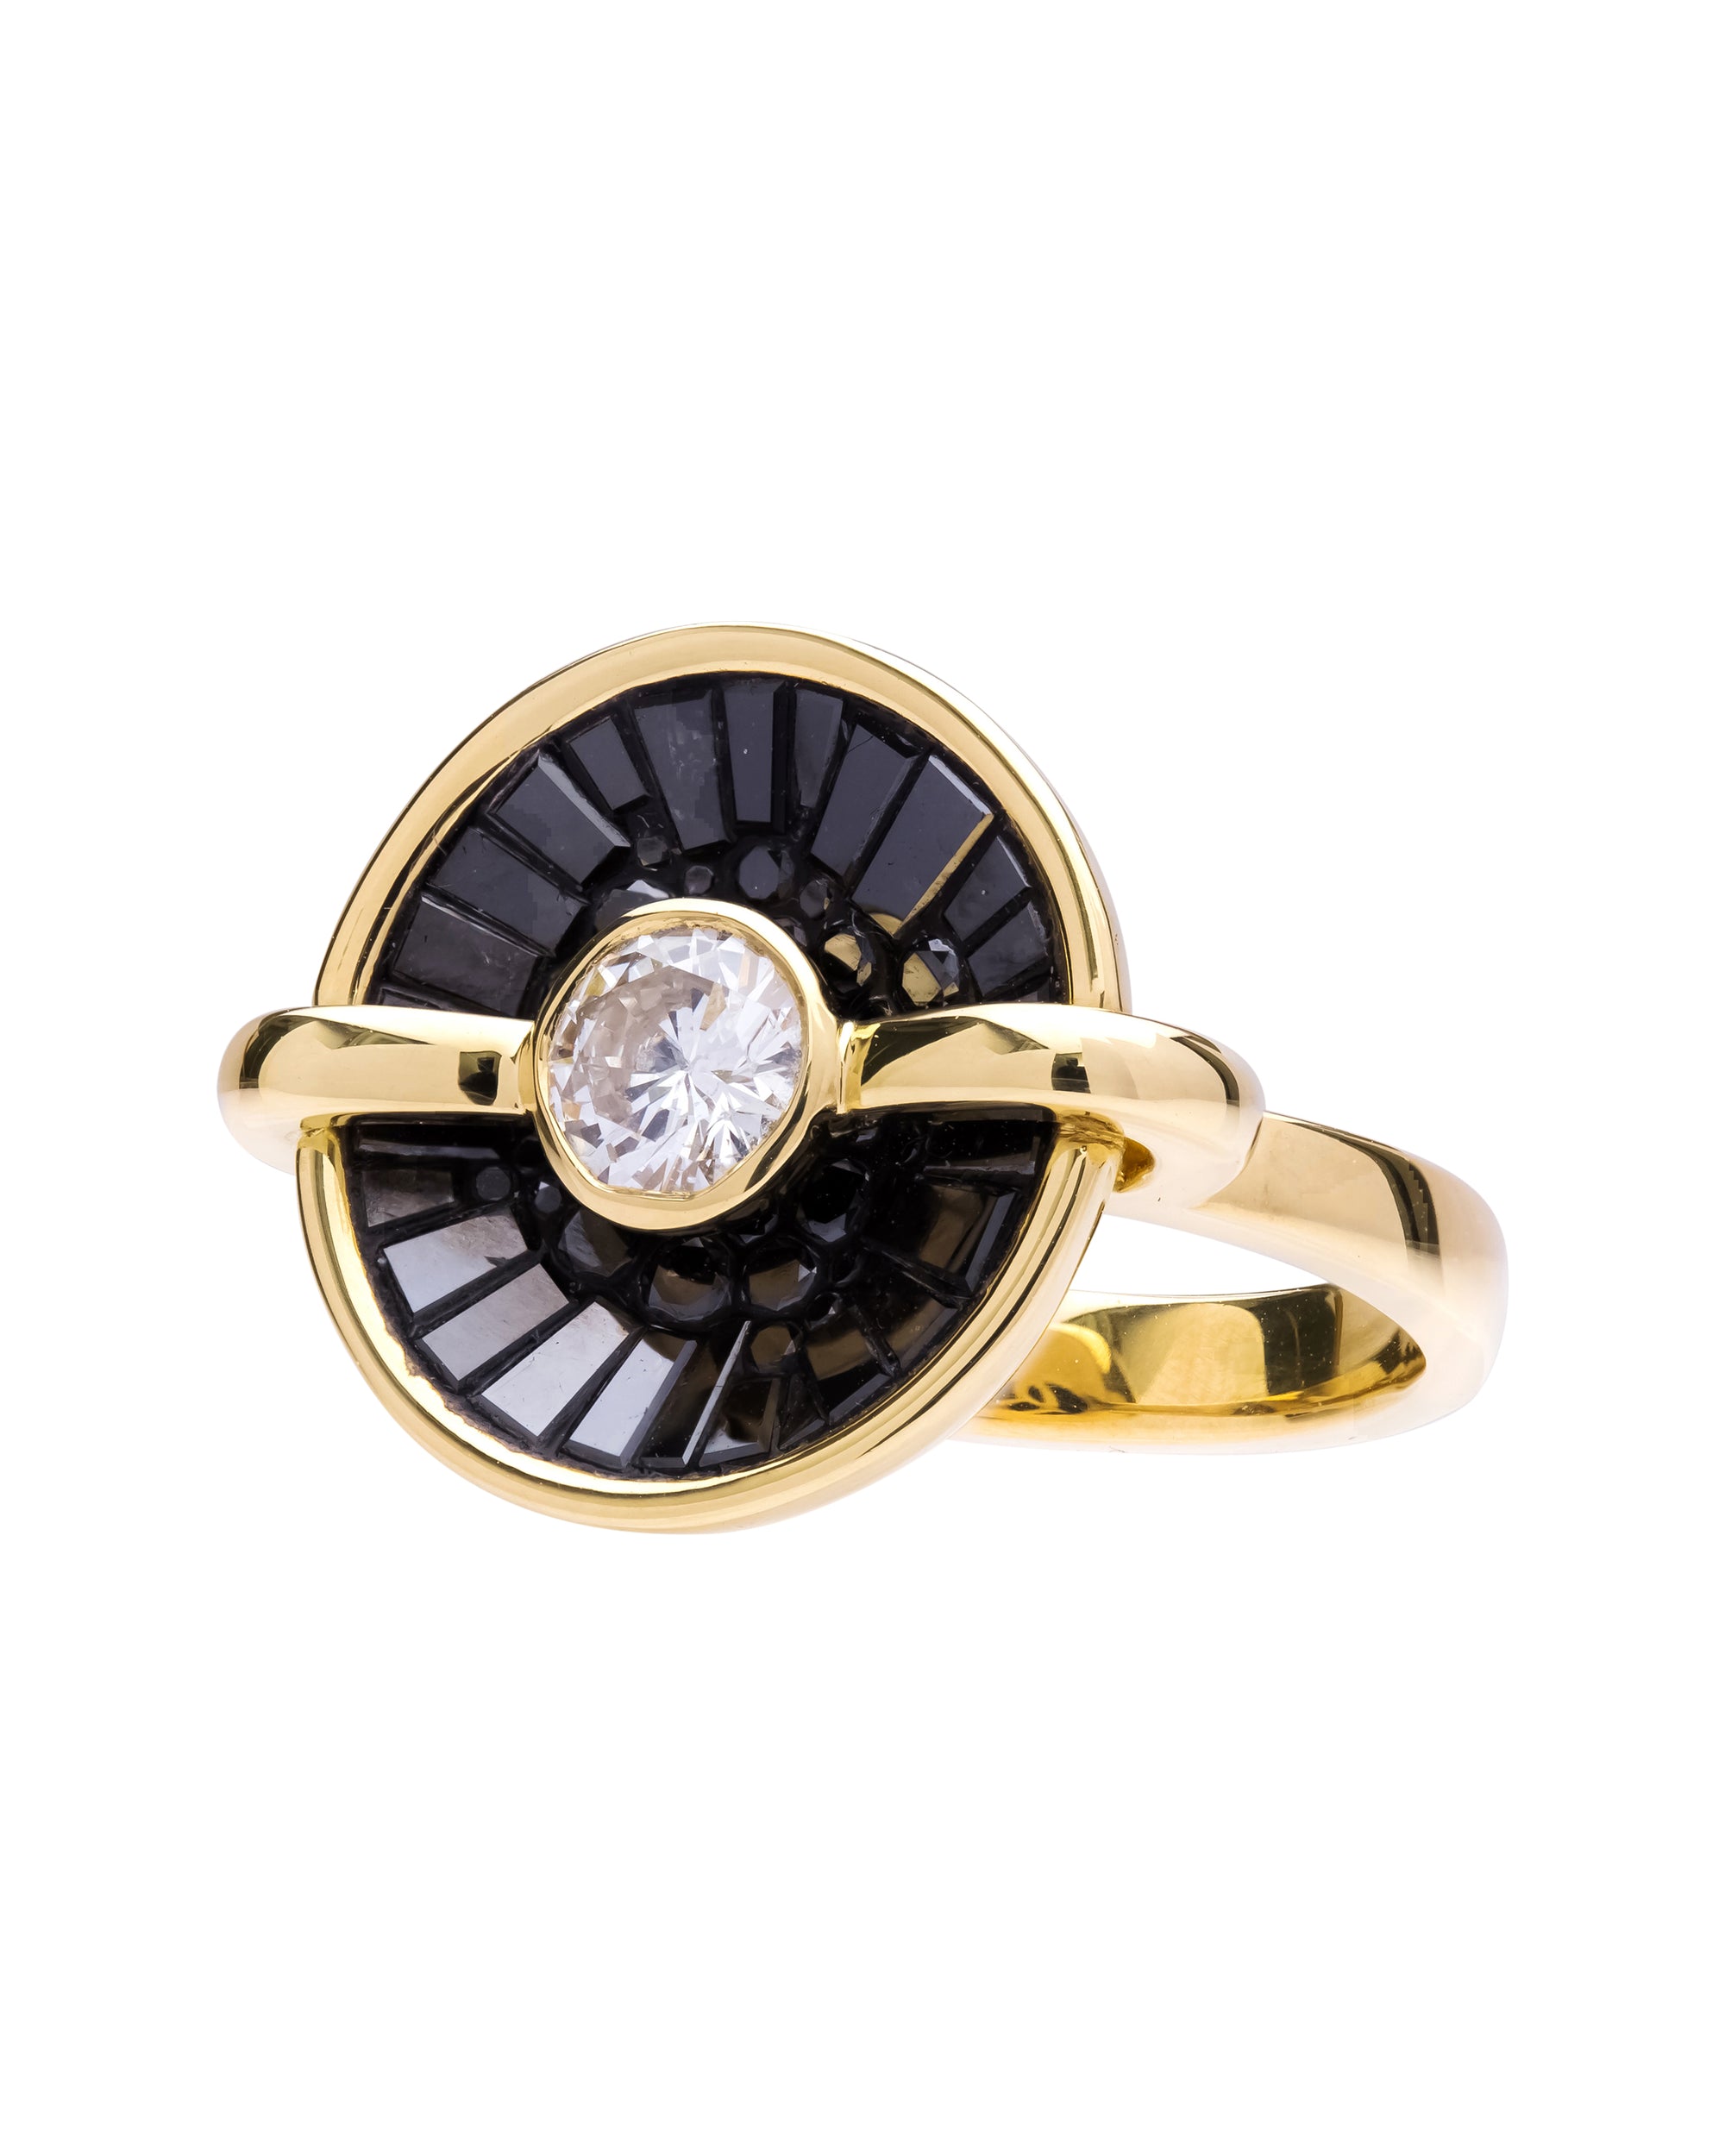 Black Diamond Opus Ring by Pleve available at Talisman Collection Fine Jewelers in El Dorado Hills, CA and online.